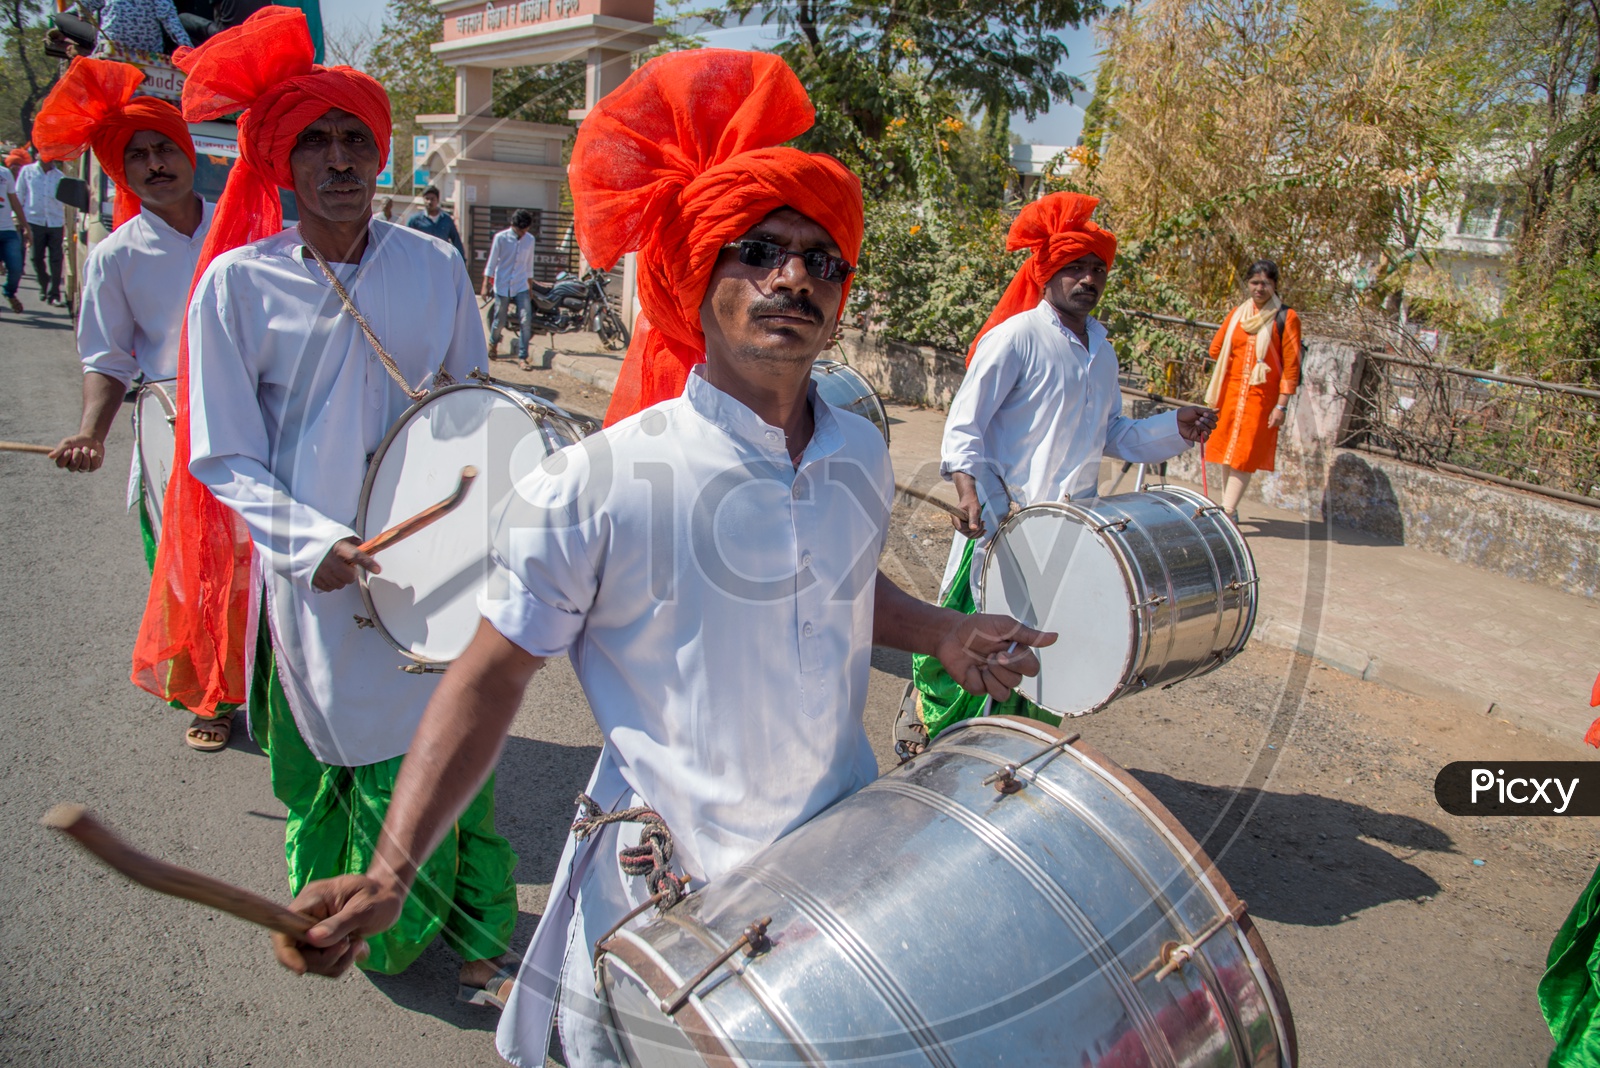 Indian Drum Artists Playing Drums On Indian Streets For The Occasion Of Republic Day Celebrations